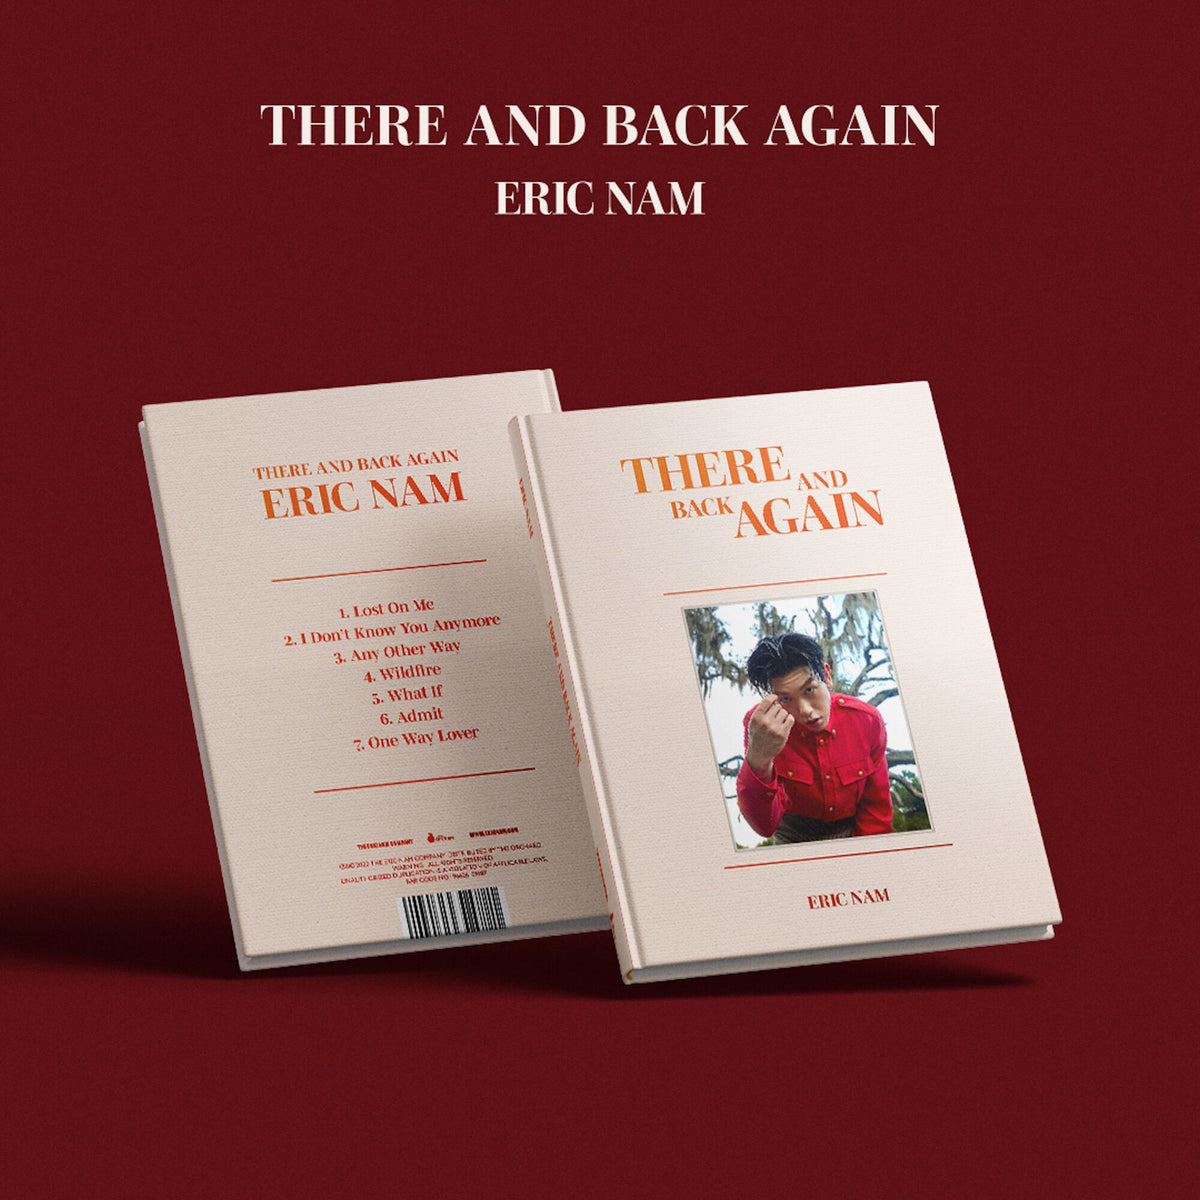 Eric Nam: There And Back Again